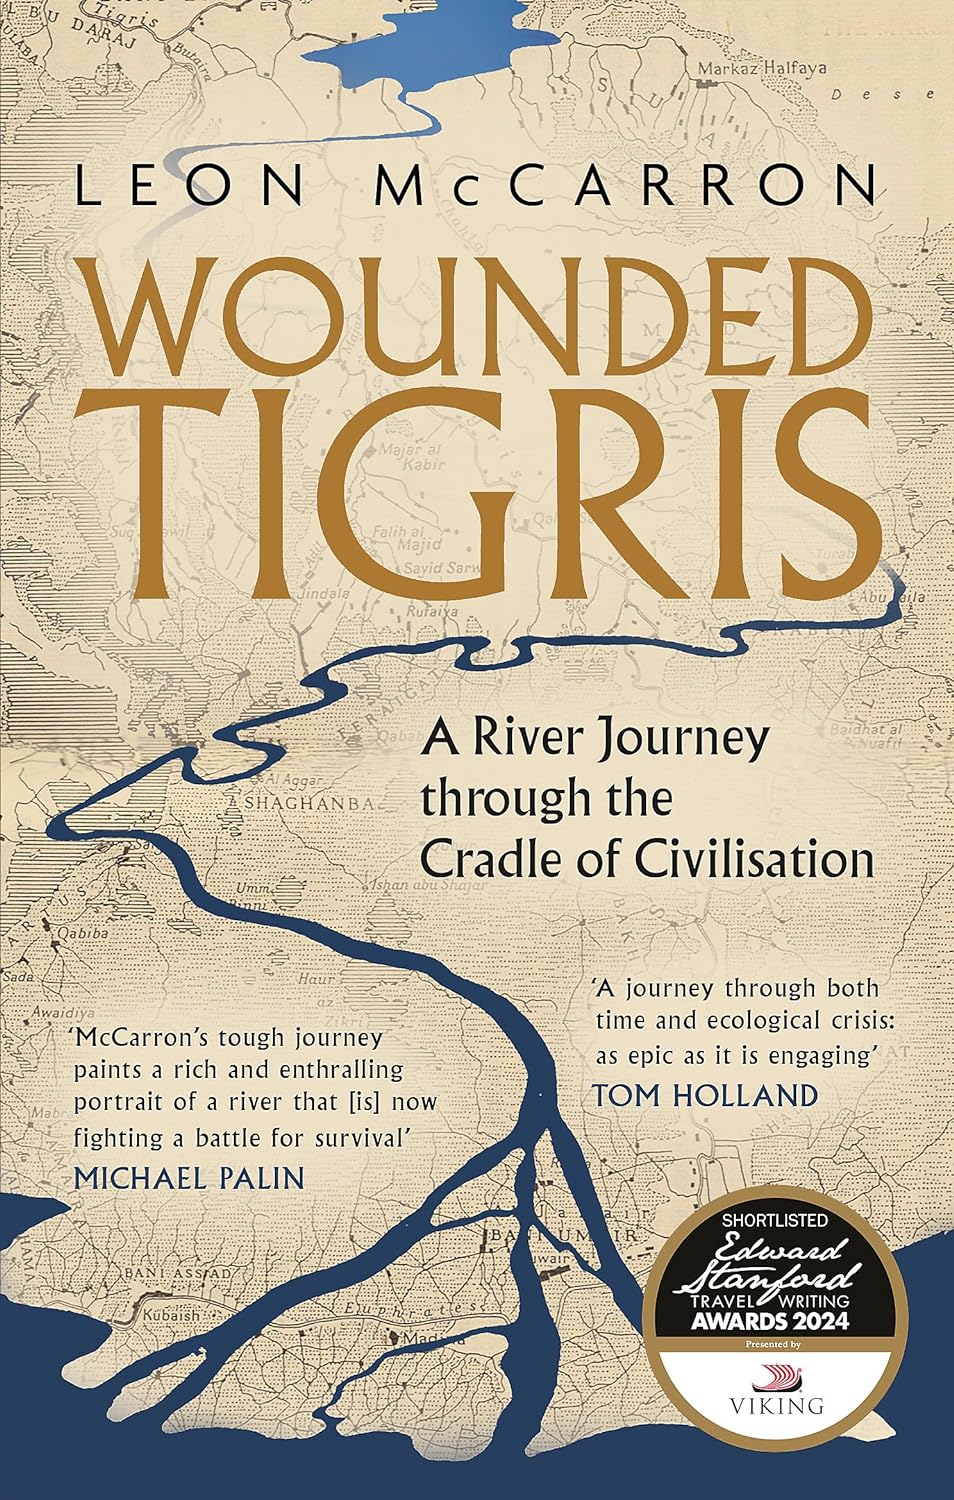 Wounded Tigris: A River Journey through the Cradle of Civilisation